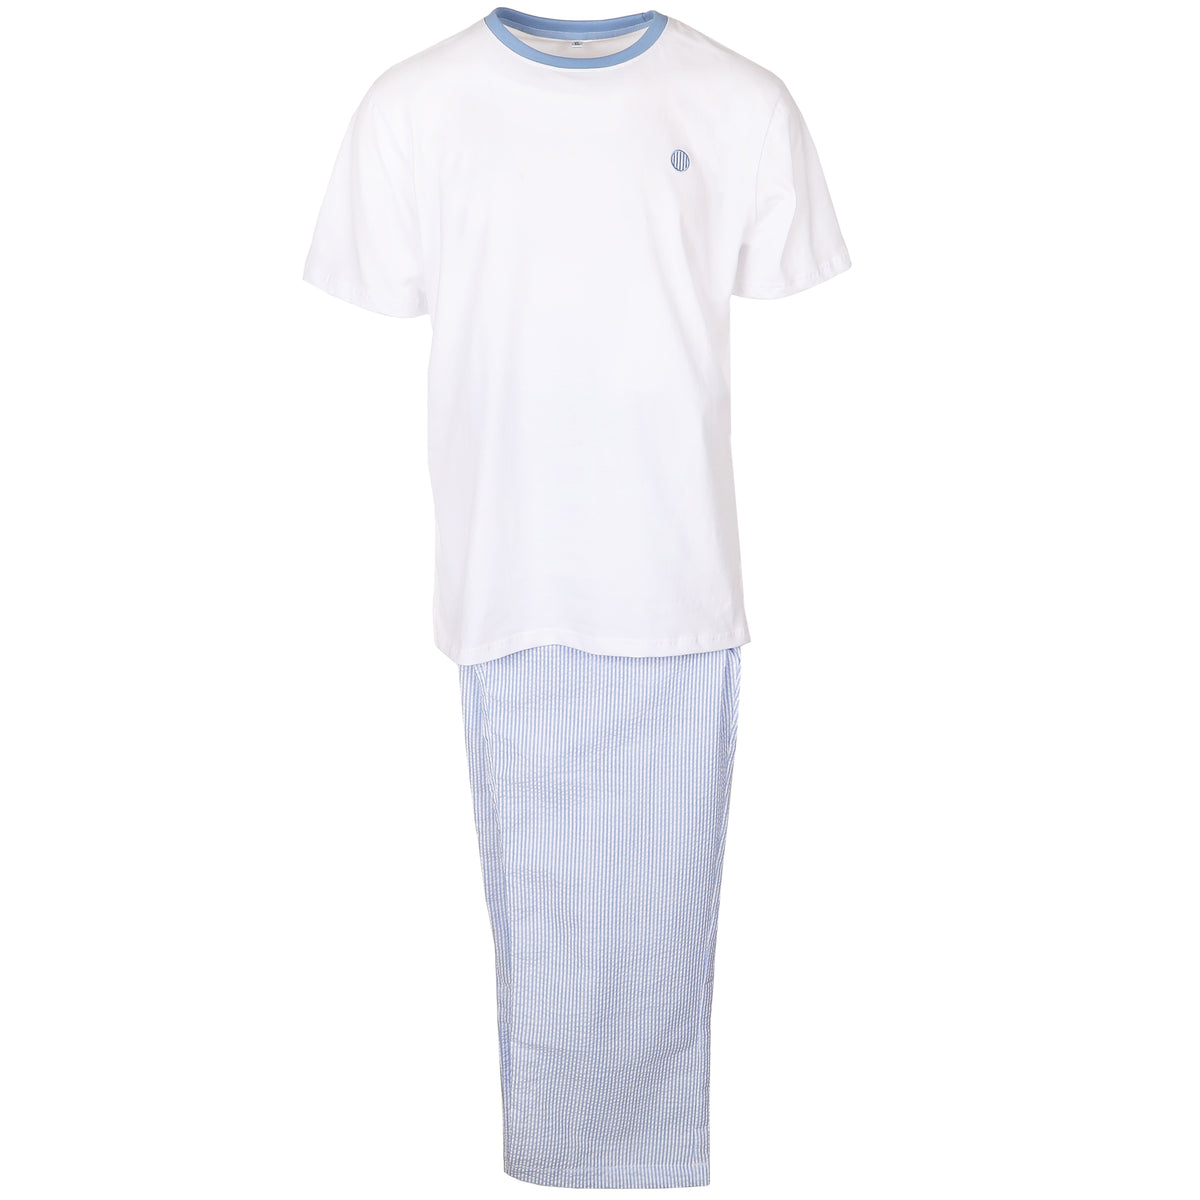 Lightweight seersucker pants plus the comfort of the softest tee. Made from 100% cotton, this Pajama set will breathe and keep you cool and comfortable. Seersucker while you saw some logs.  Unlined  •  Machine Washable  •  100% Cotton Seersucker  •  Two Pockets  •  Elastic Tie Waist  •  Imported